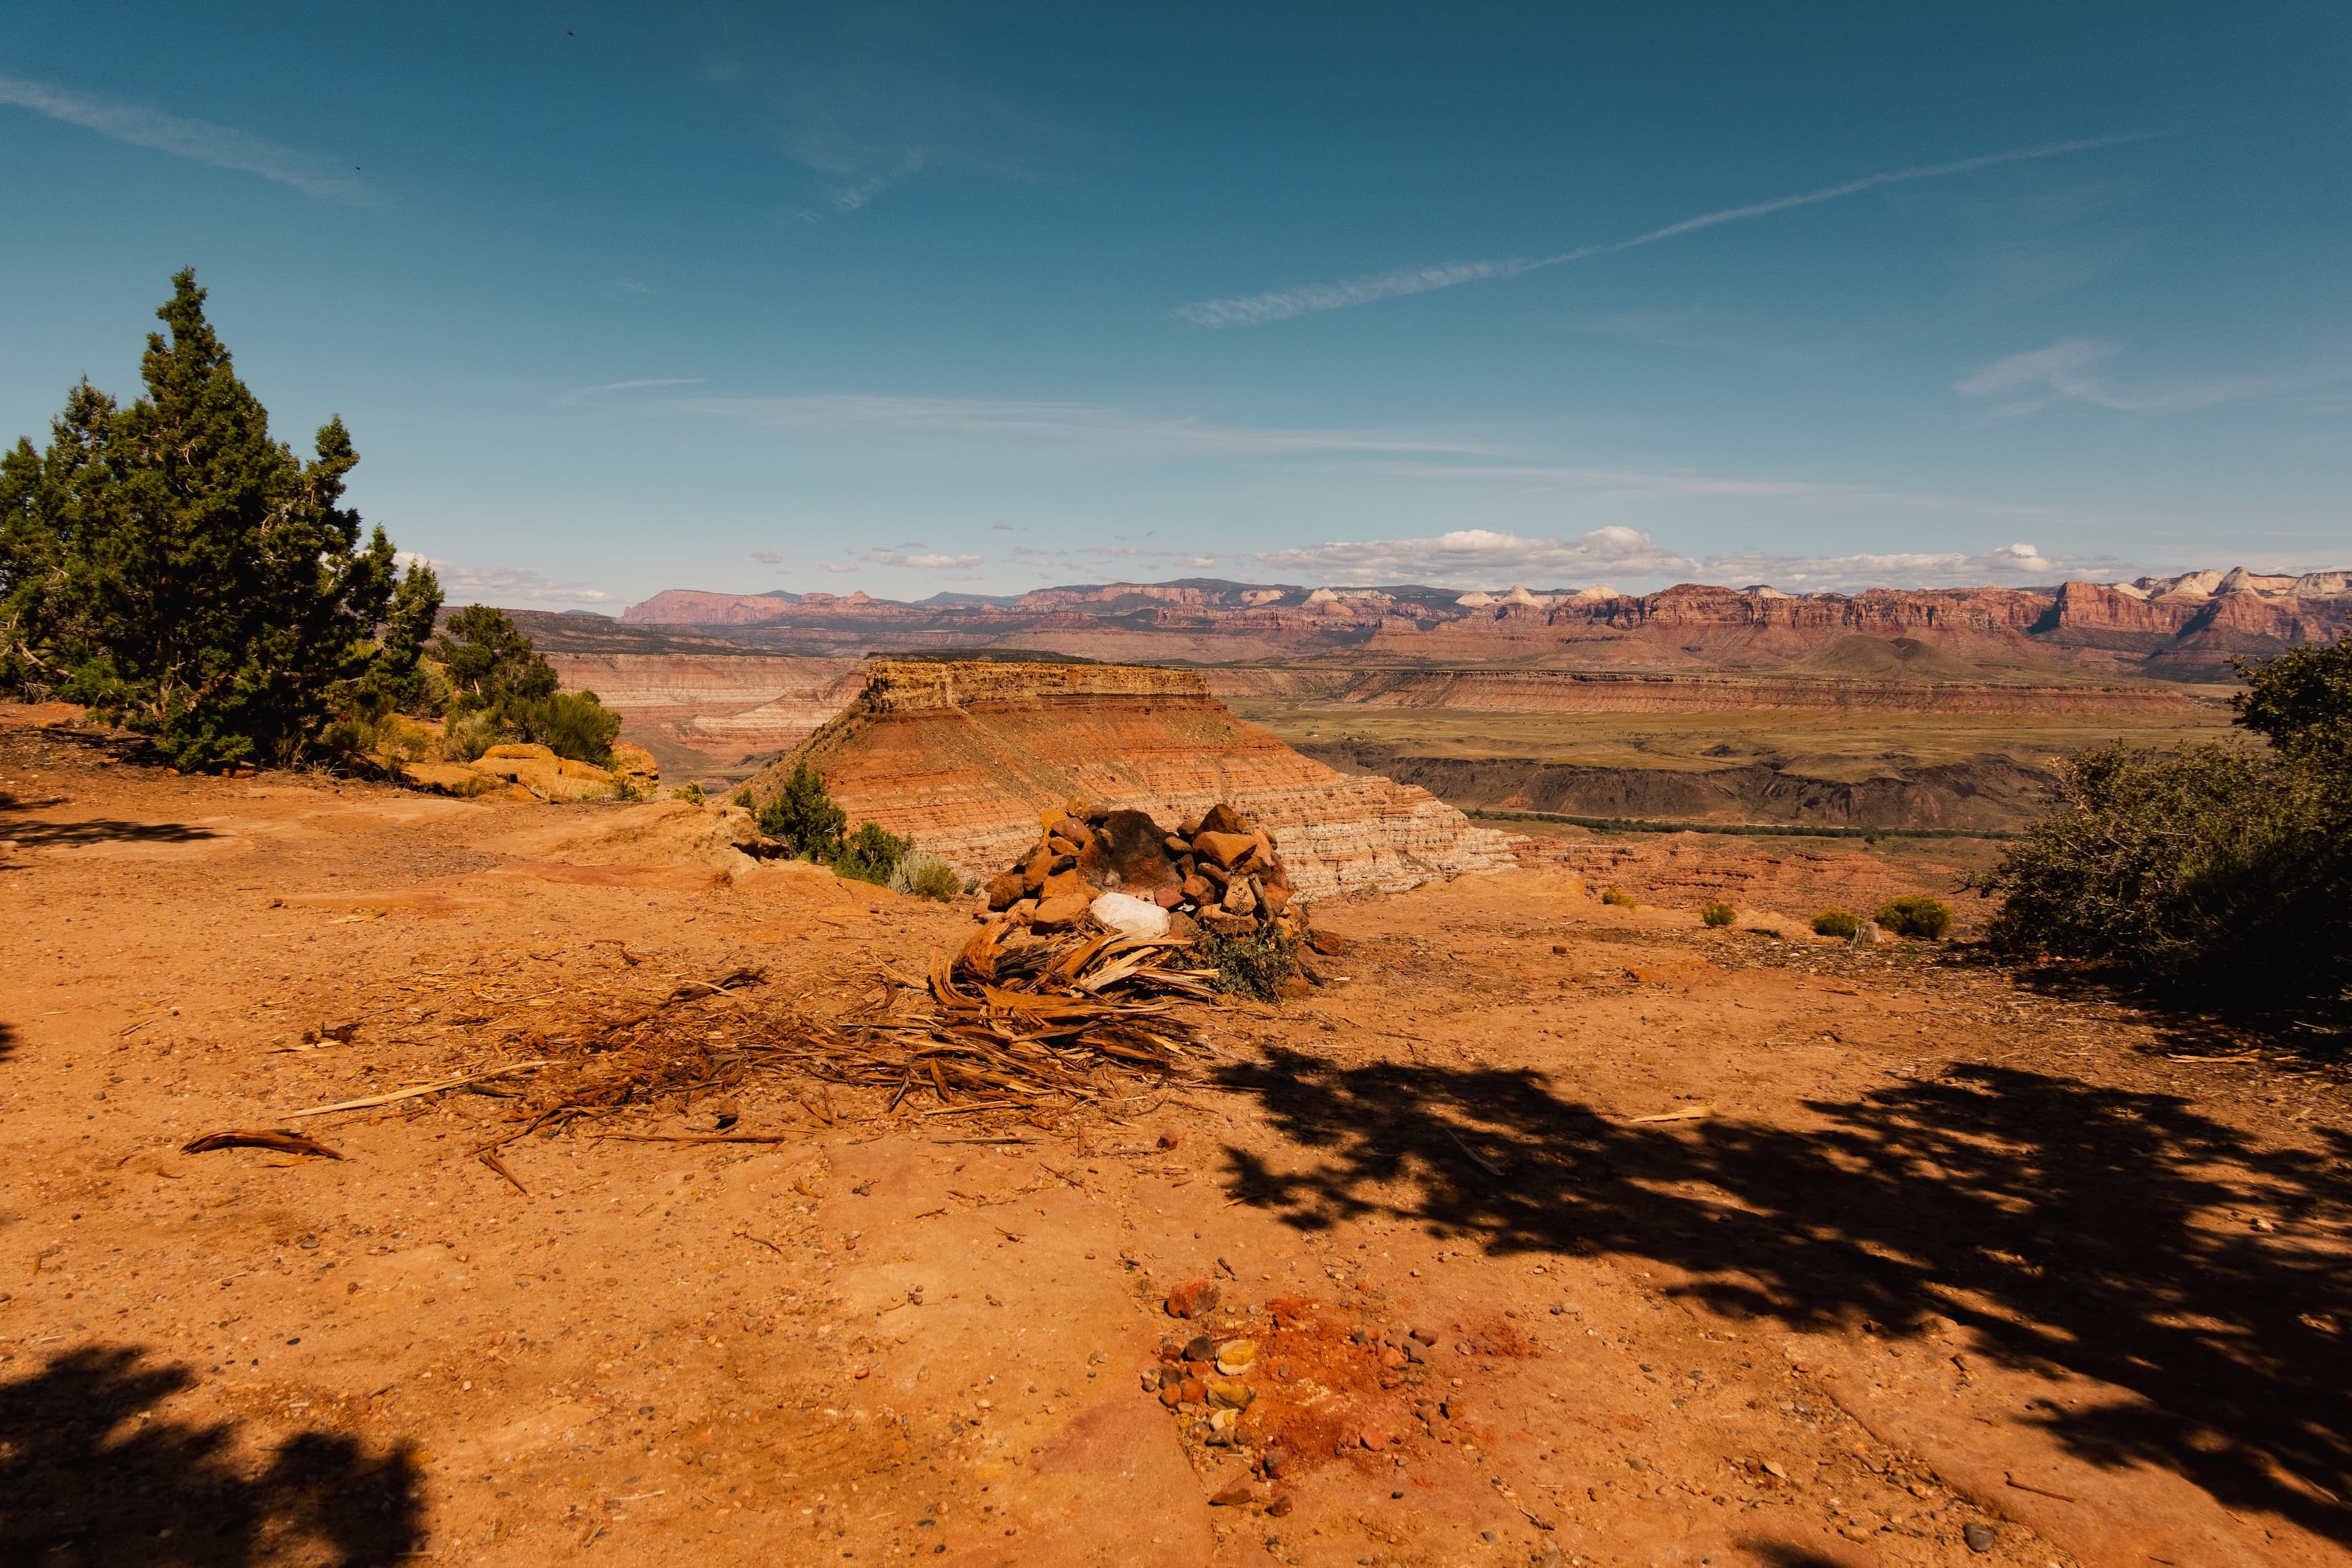 A panoramic view of a vast canyon with layered rock formations in various hues of red and orange, under a wide blue sky with delicate cloud trails. A pile of rocks and wood debris making up a non-active camp fire ring is in the foreground.